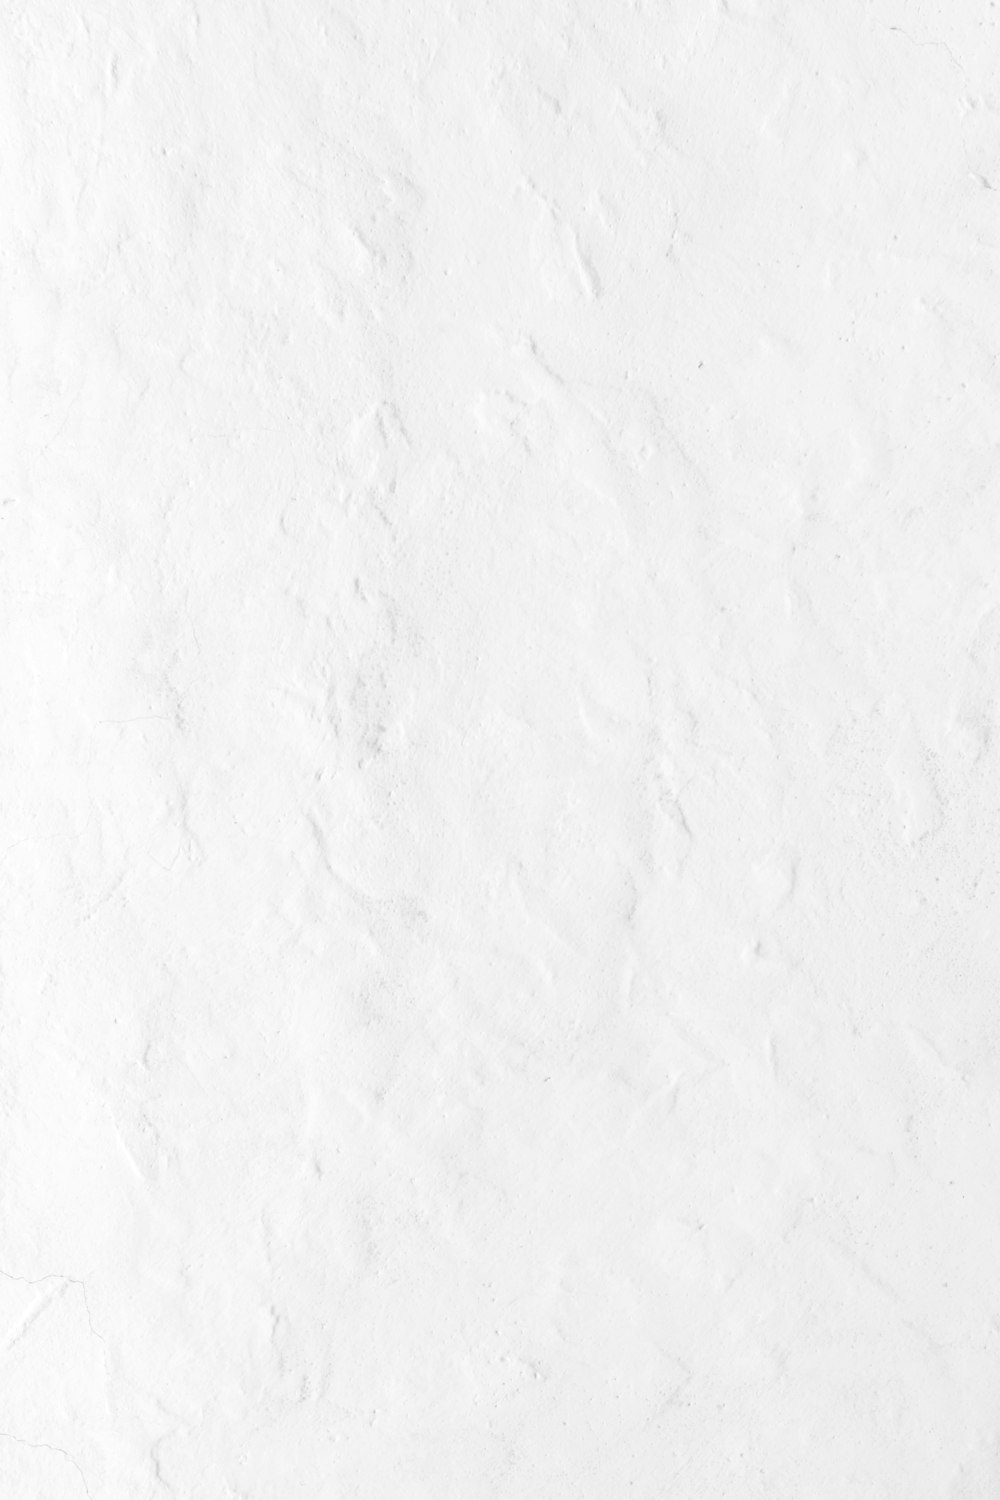 550+ White Texture Pictures | Download Free Images on Unsplash